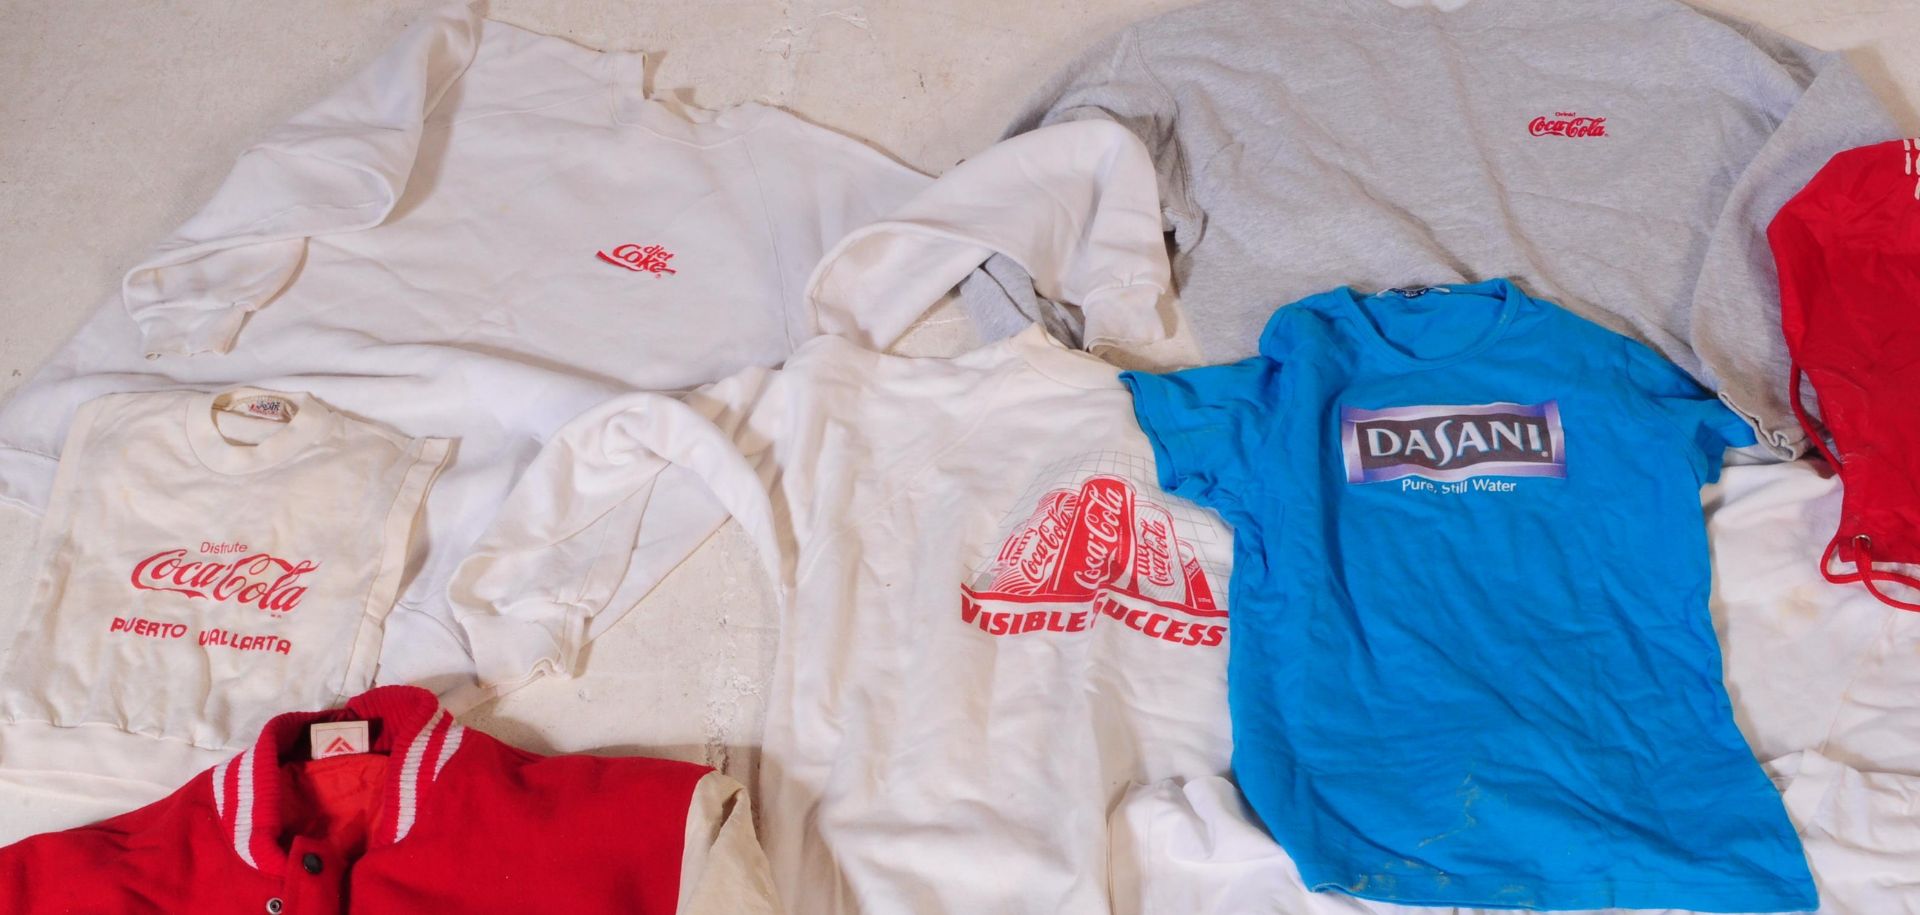 LARGE COLLECTION OF VINTAGE COCA COLA CLOTHING - Image 4 of 5